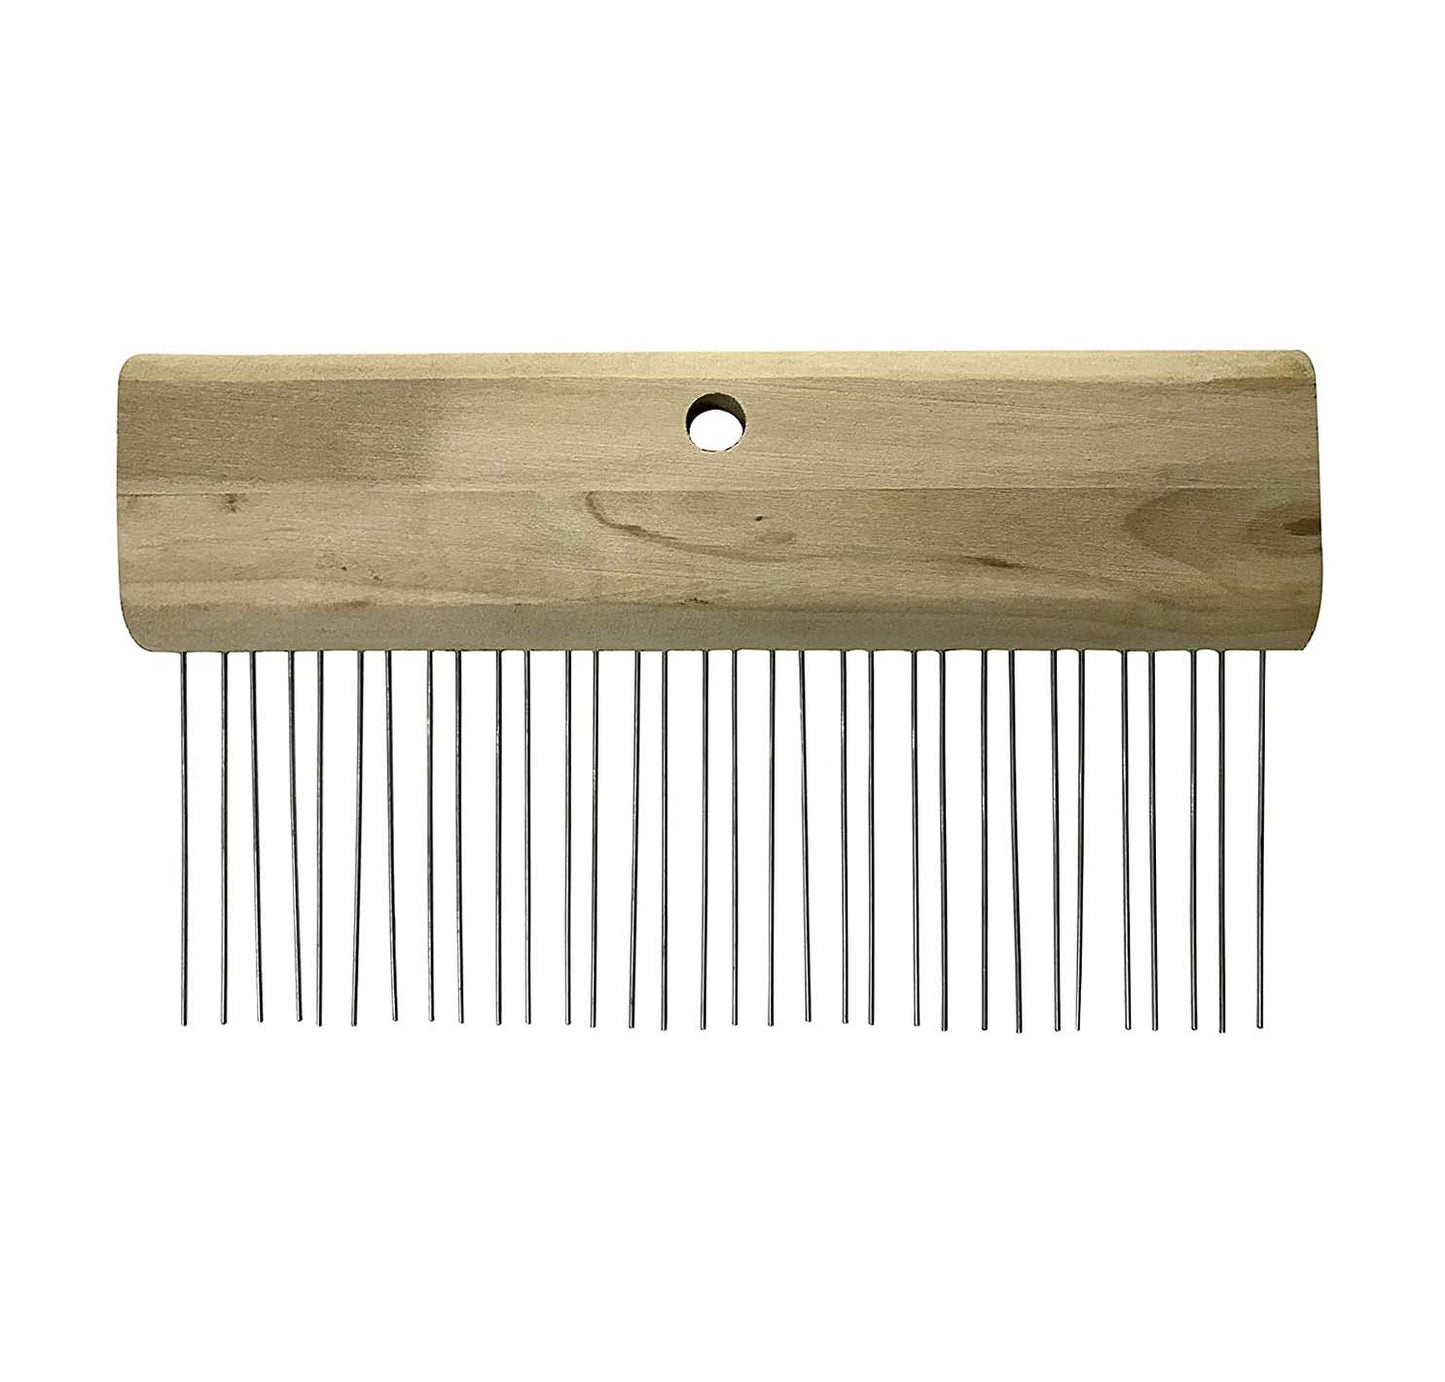 Asian Paints Royale Play Antico Metal Comb